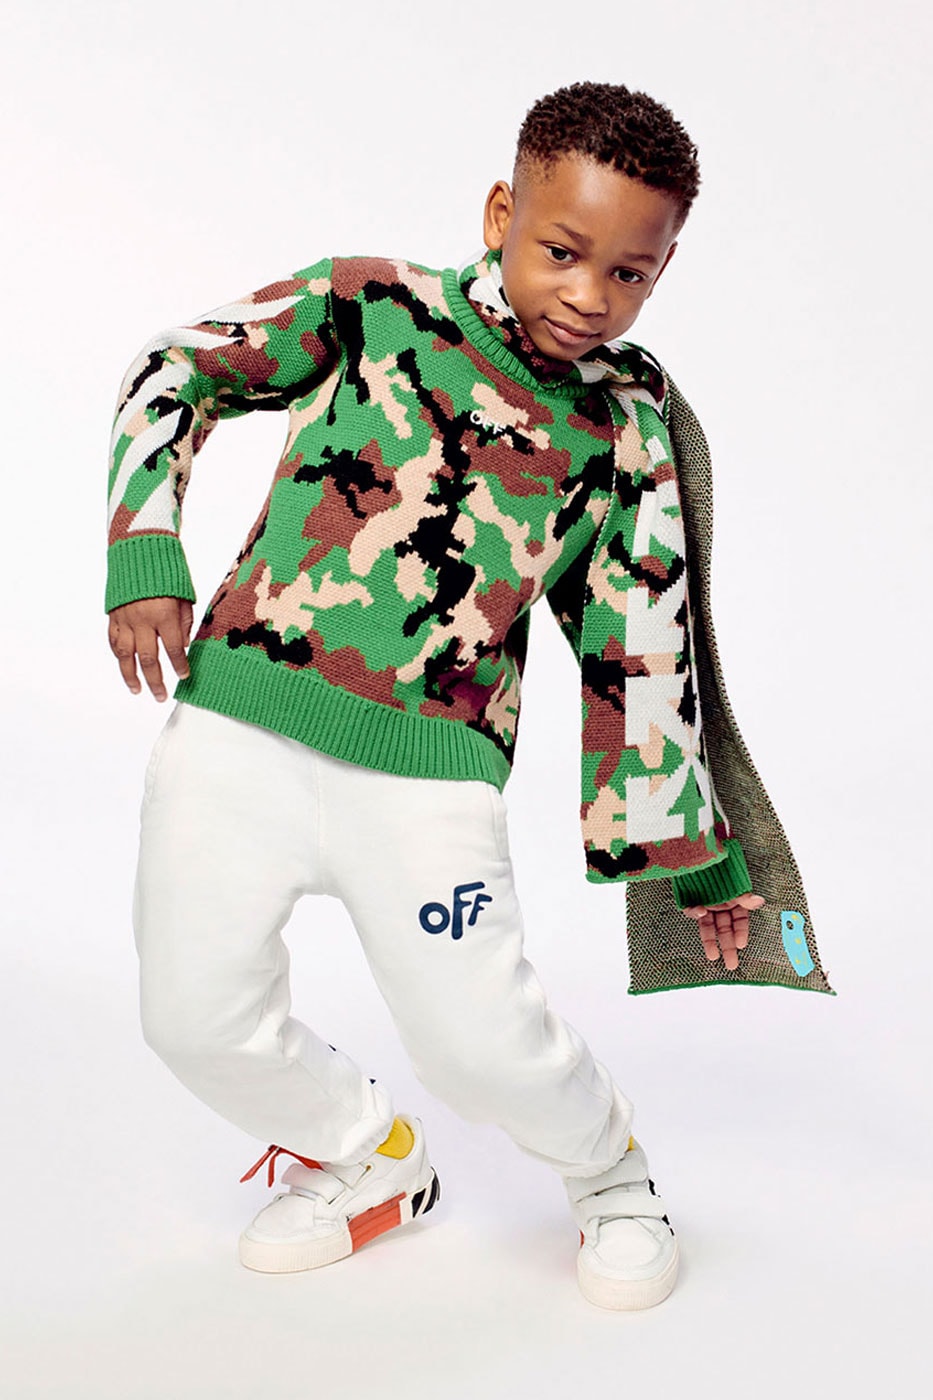 Off-White™ Kids Releases its FW21 Collection hippie culture bright colors camo checkered flannel letterman jackets low vulcanized sneakers virgil abloh fall winter 2021 release info